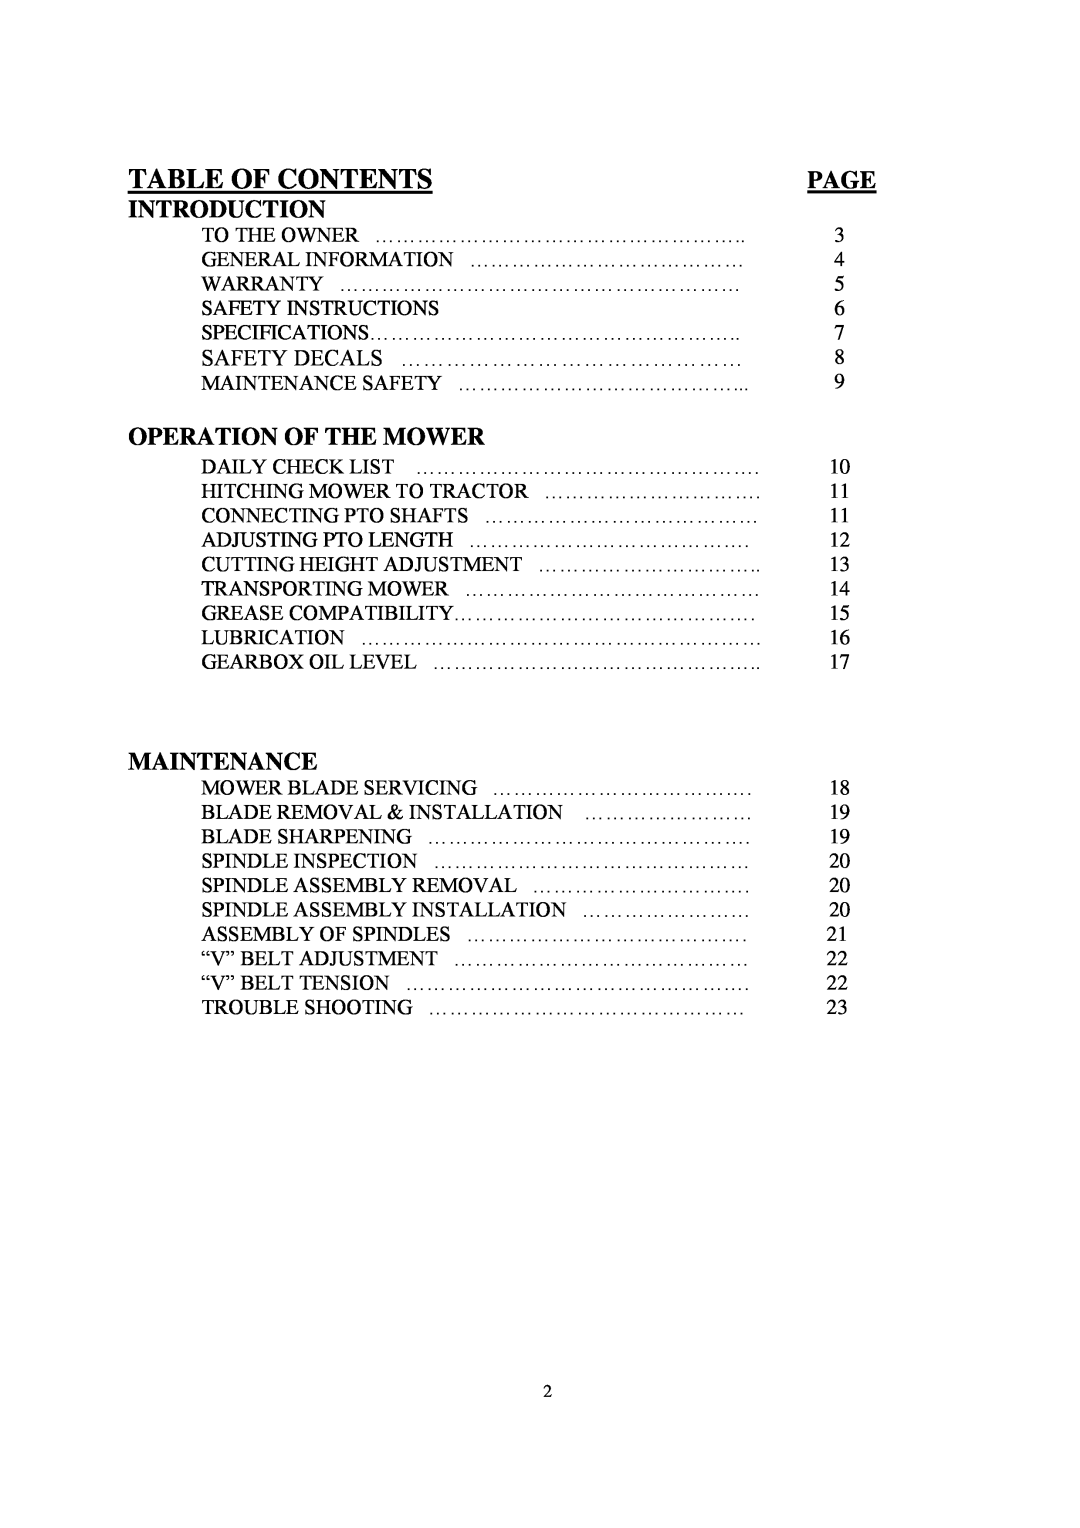 Progressive Turf Equipment SDR65, SDR 90 manual Table Of Contents, Page, Introduction, Operation Of The Mower, Maintenance 